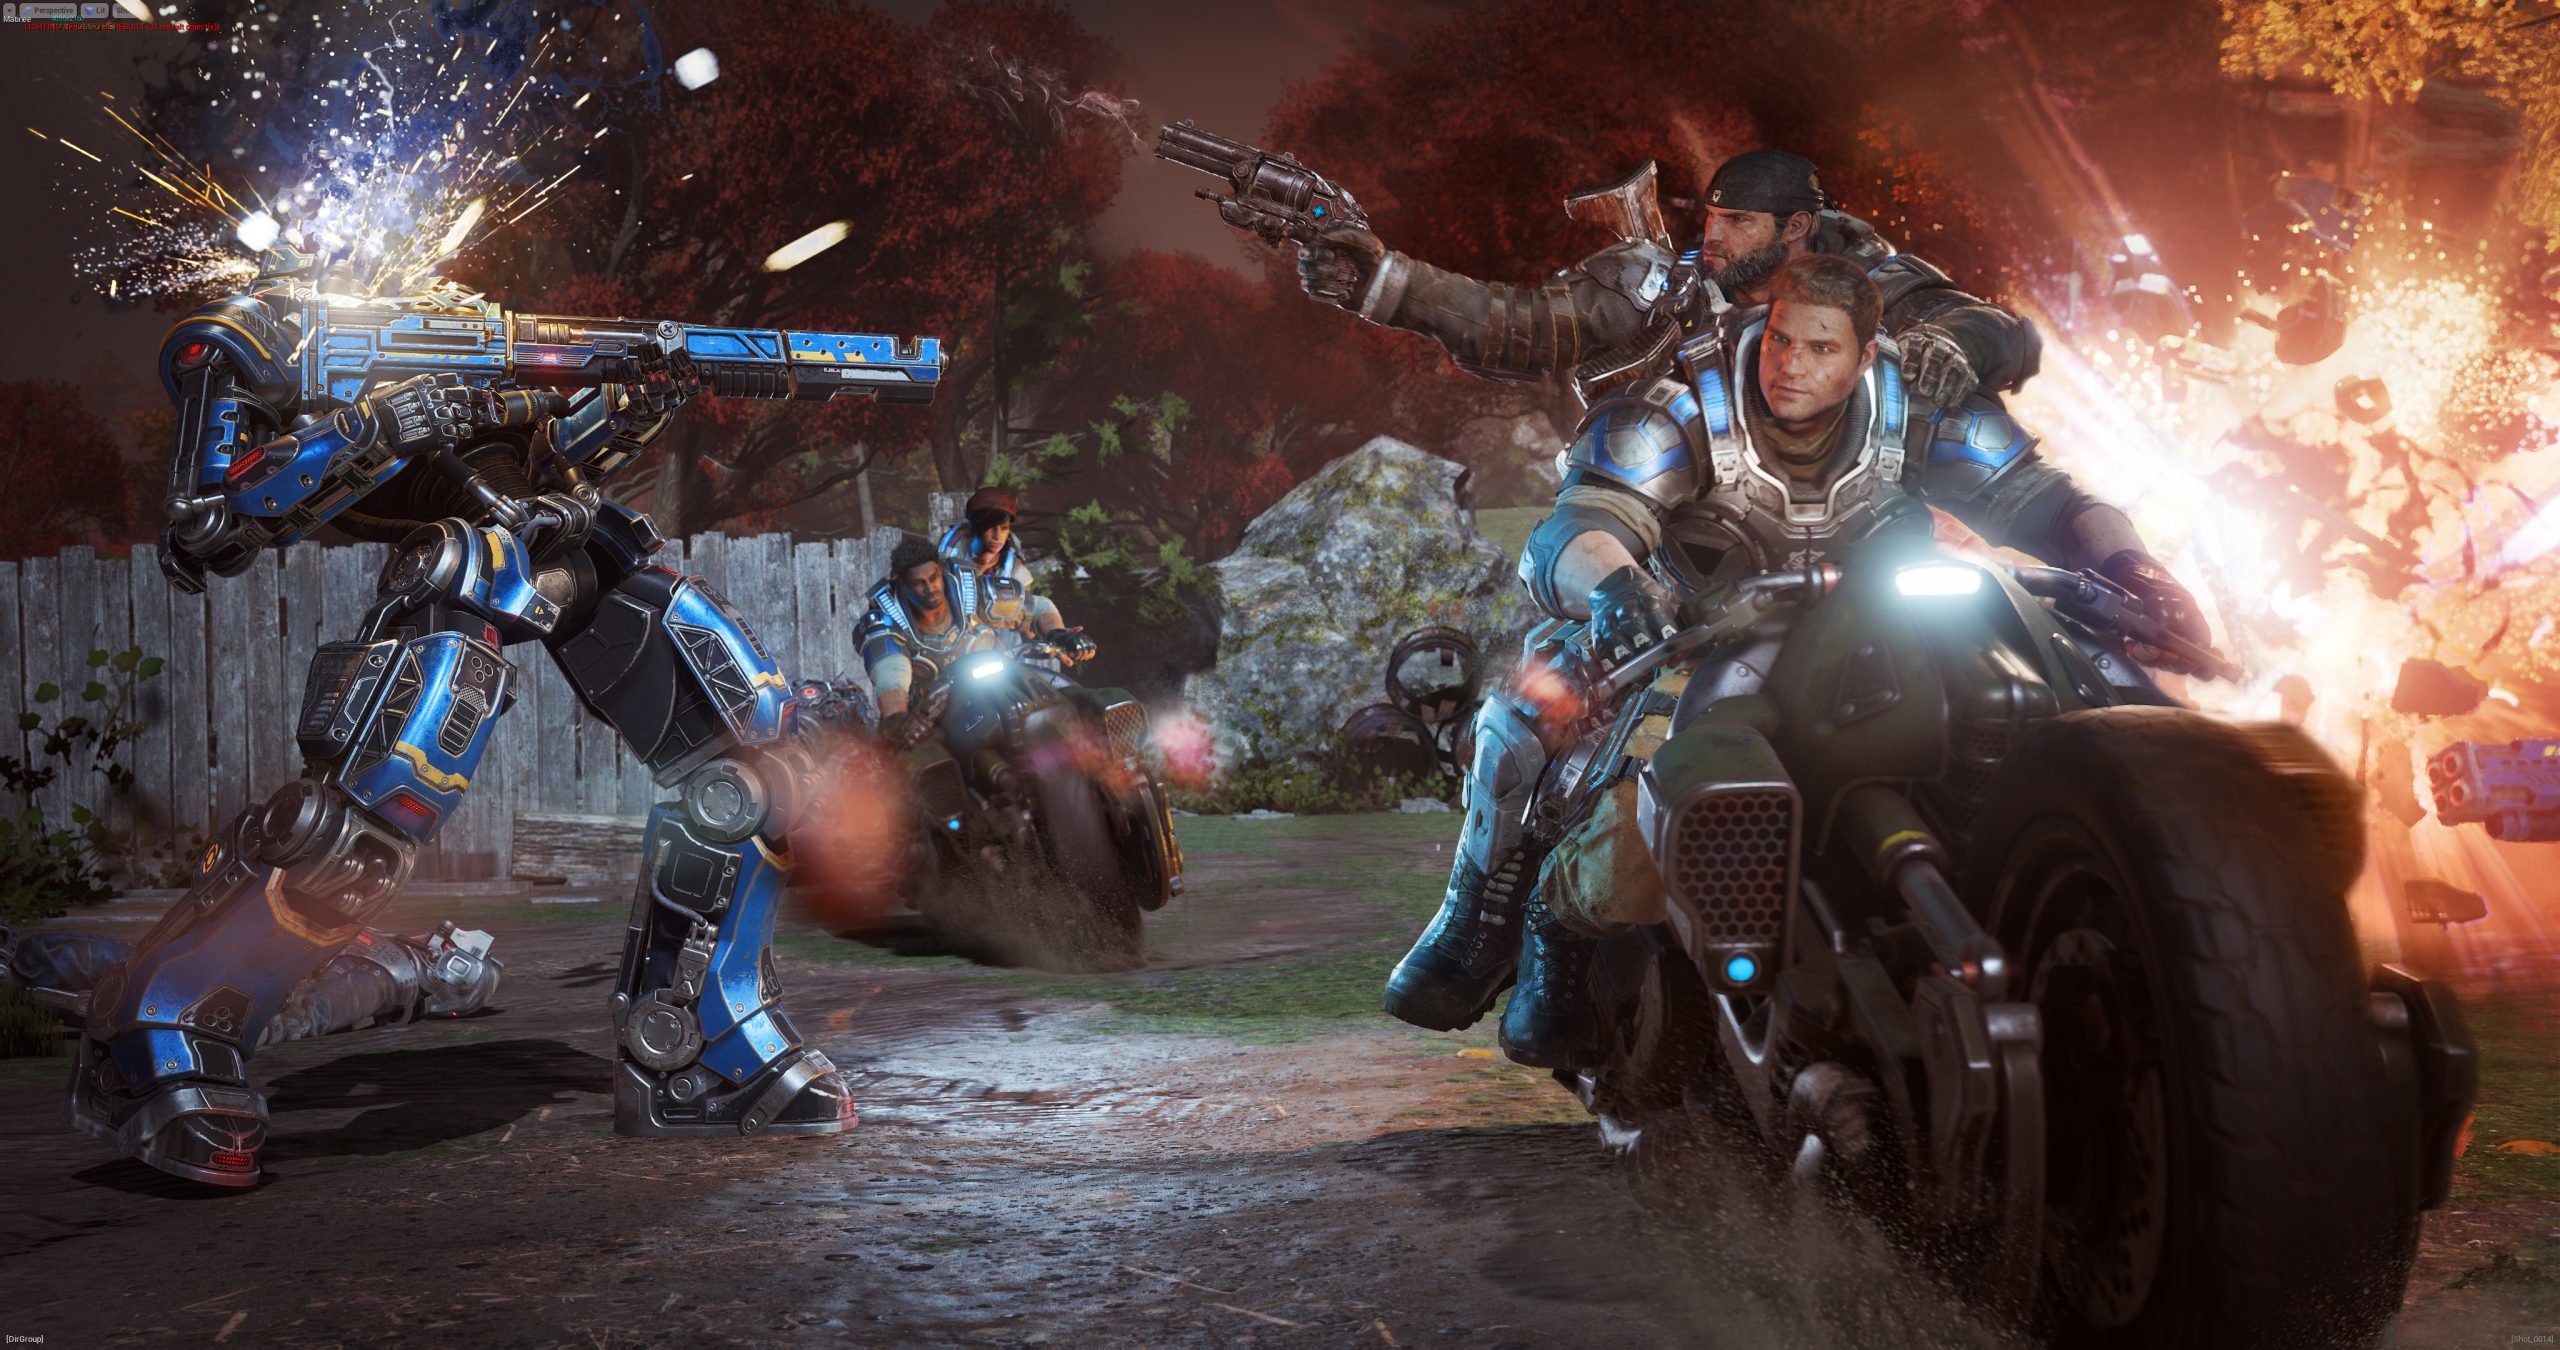 gears-4-two-player-co-op-5e729653c0146-scaled.jpg